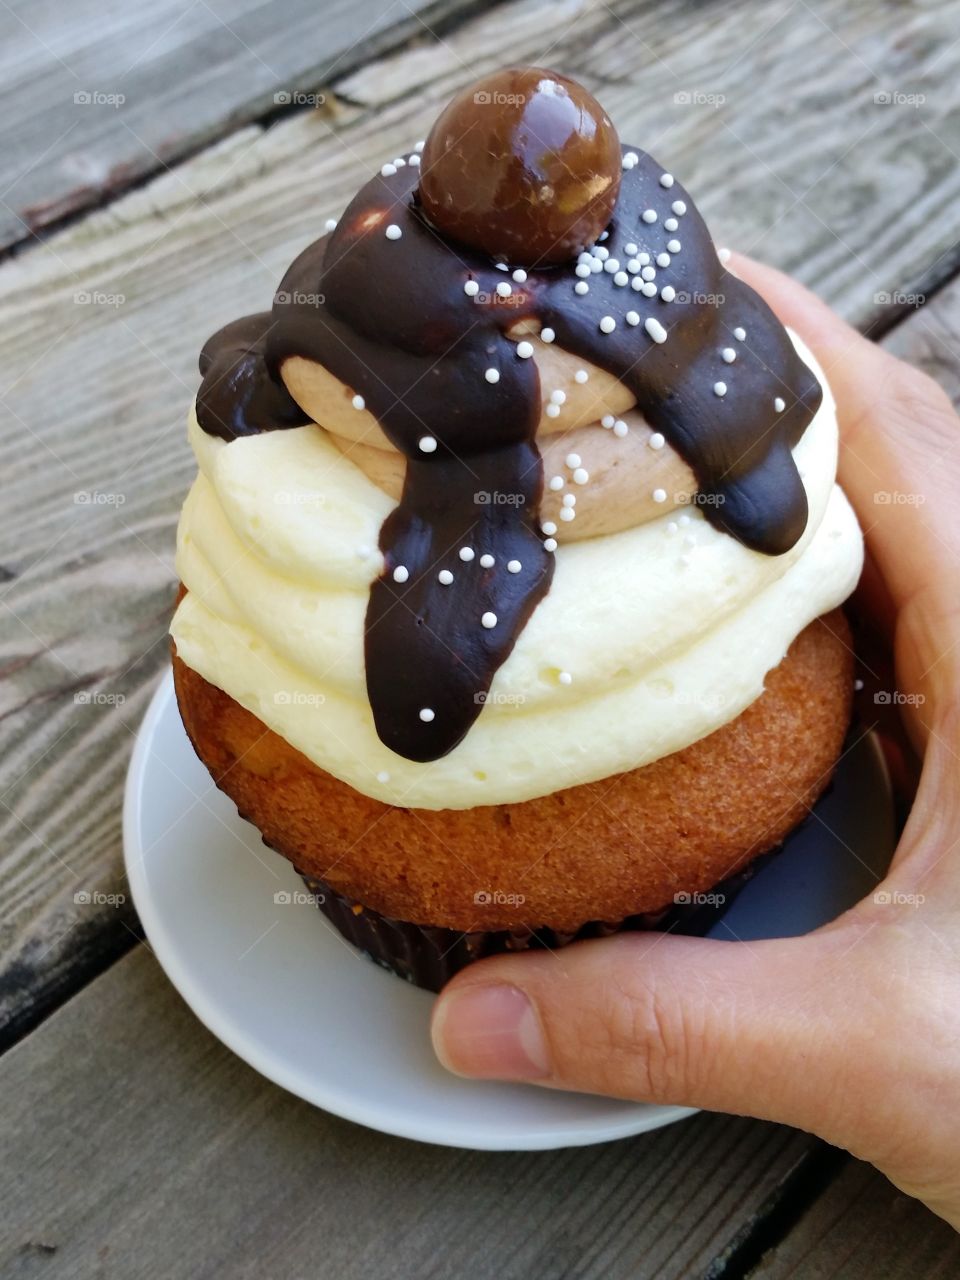 Salted caramel cupcake with chocolate fudge and vanilla frosting, with hand